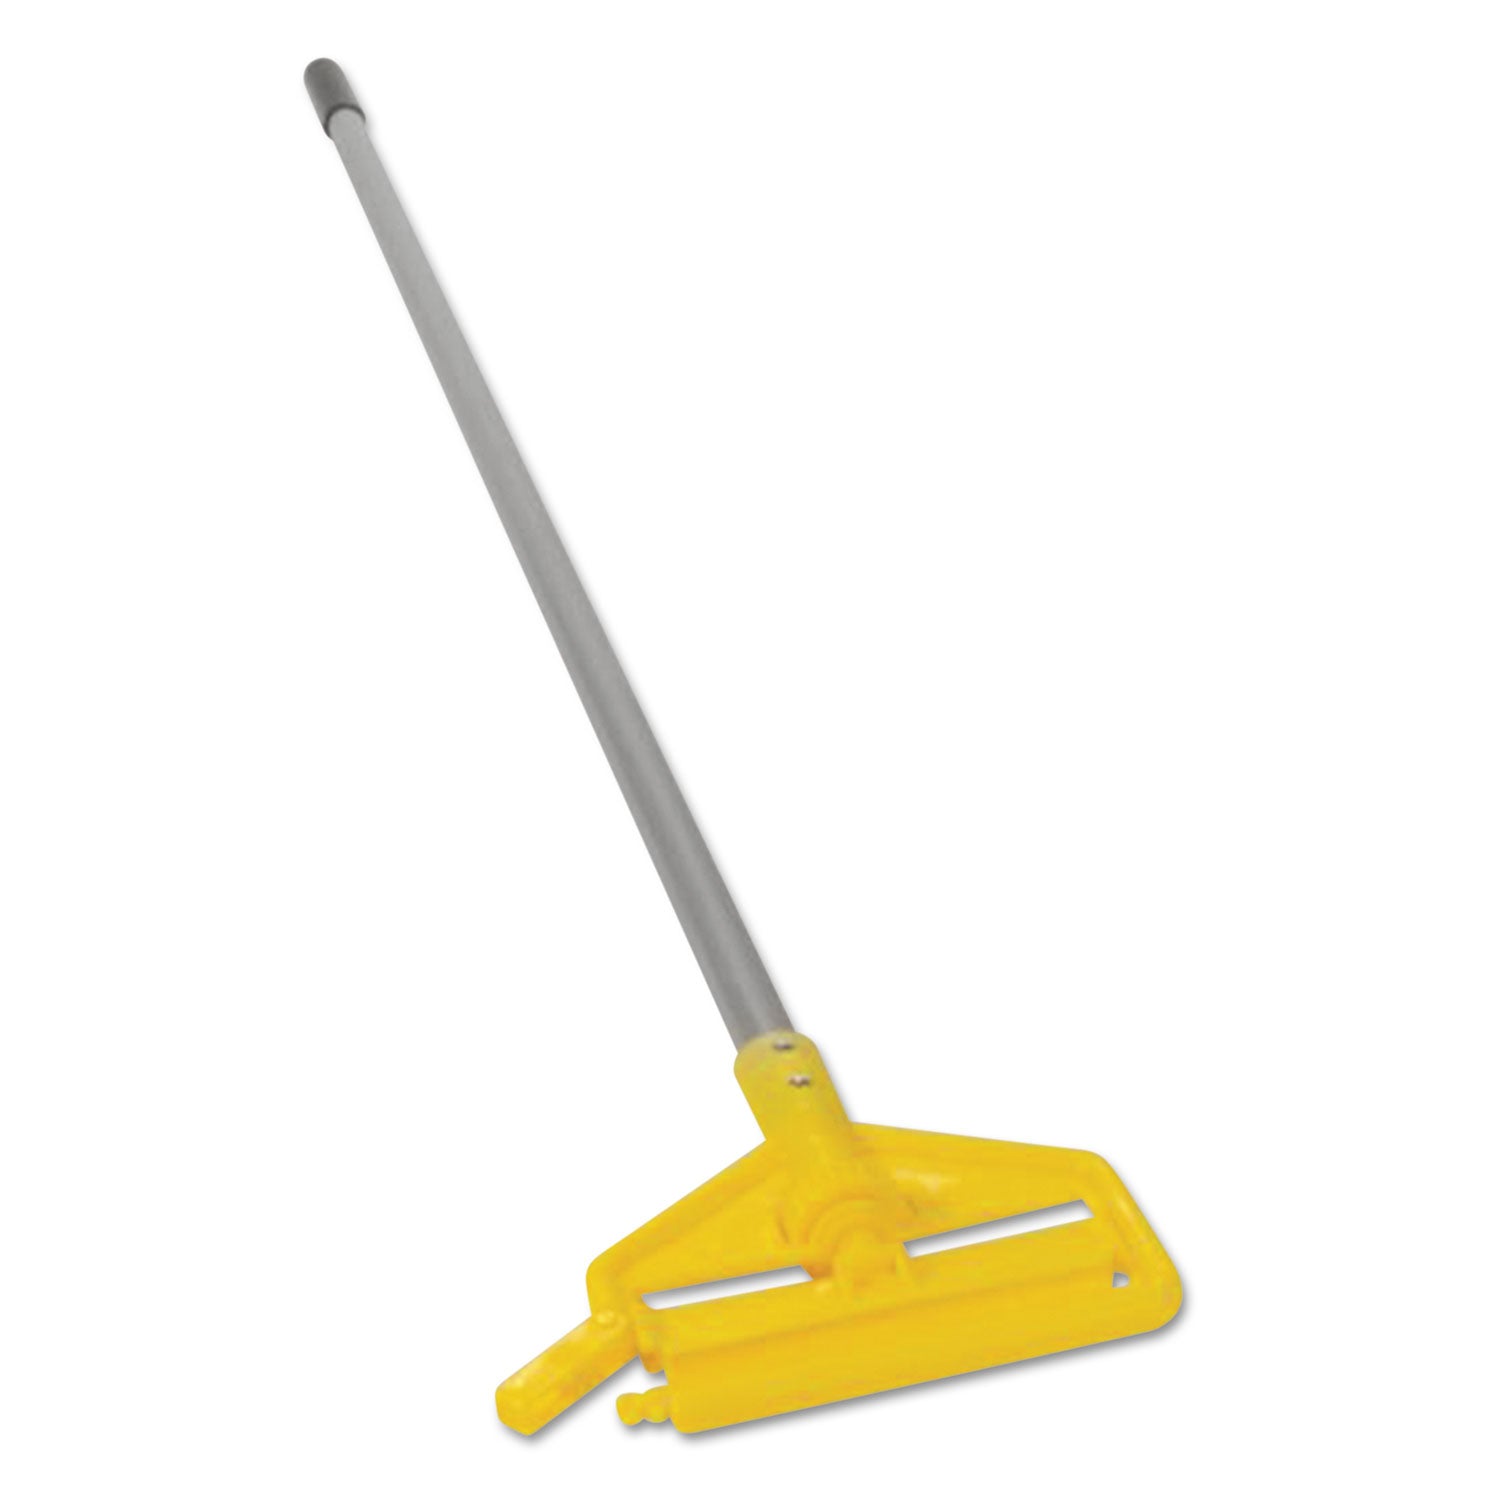 Invader Aluminum Side-Gate Wet-Mop Handle, 1" dia x 60", Gray/Yellow - 